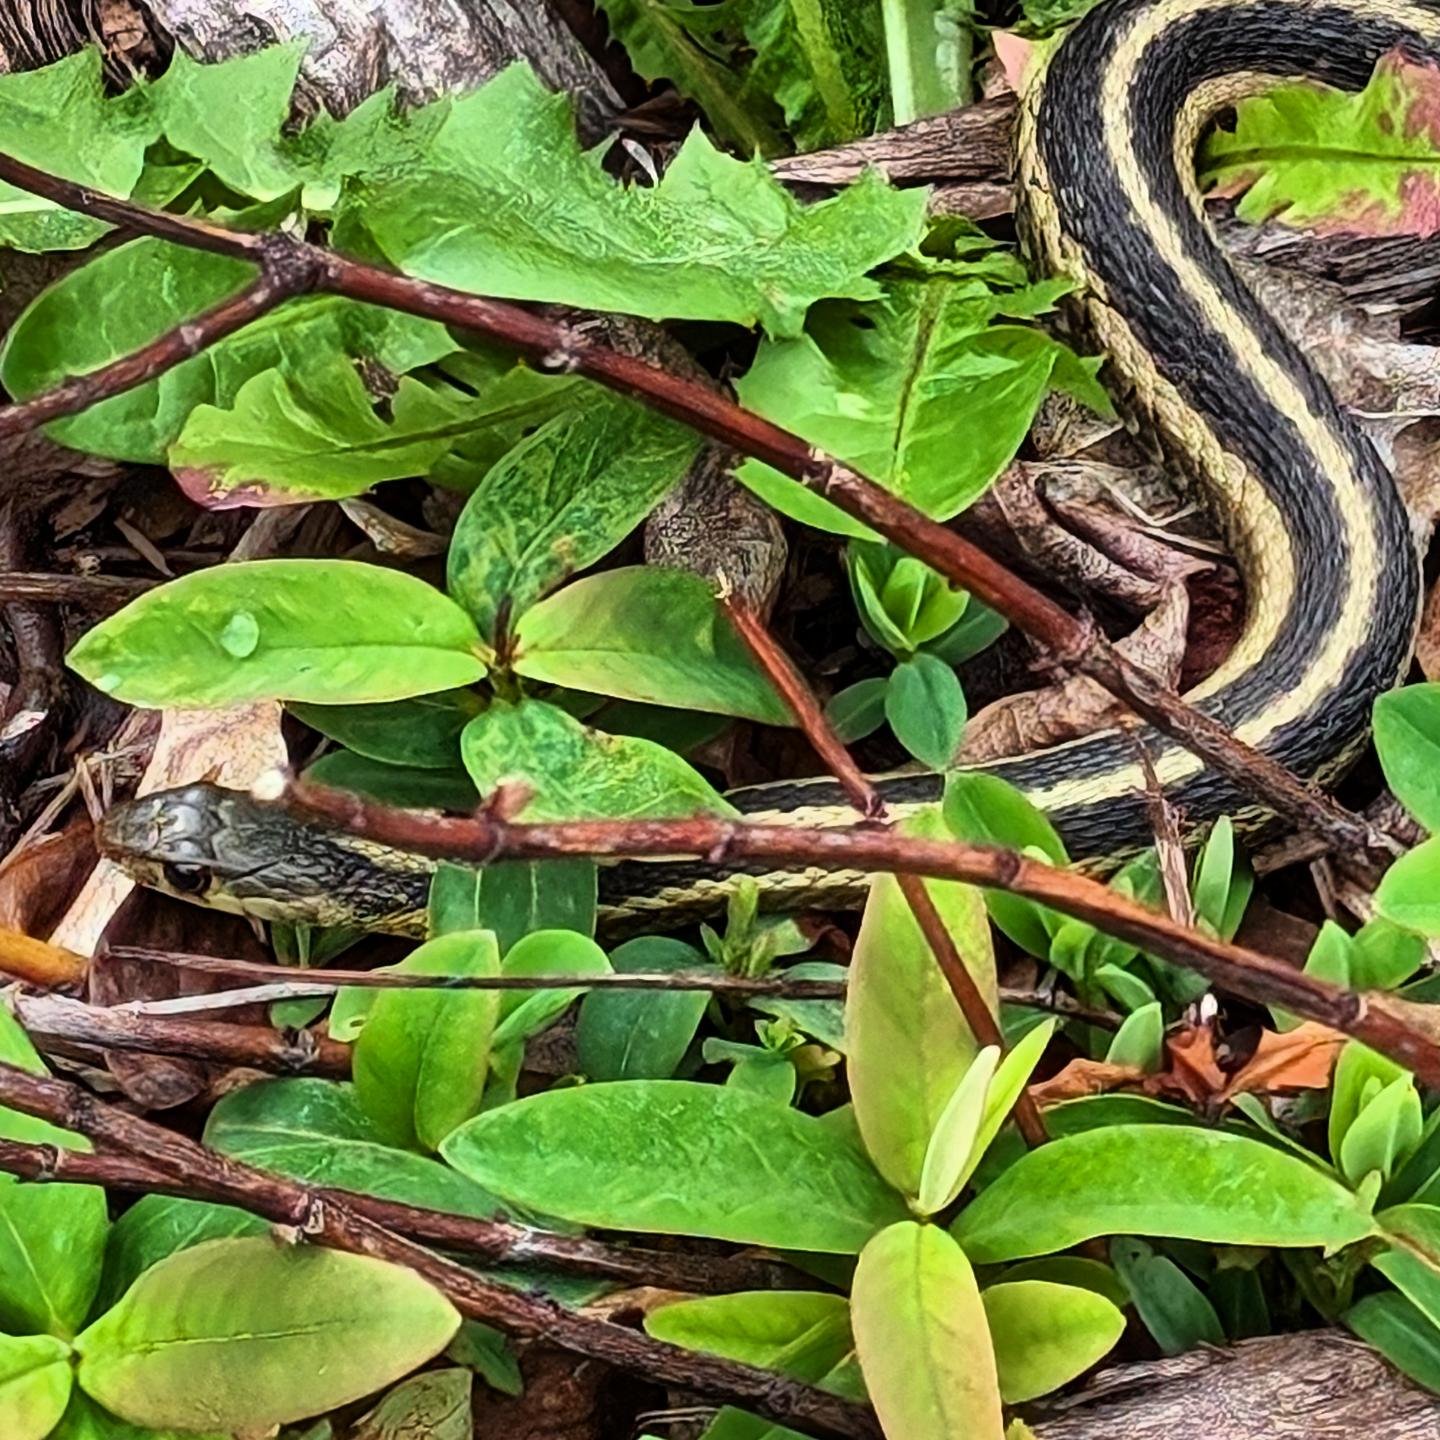 I was watering and weeds and saw this pretty little garter snake chilling in my Hypericum.
They are coming out and please cherish them. They are known to be a gardener's friend. They are harmless to humans, shy, and will eat the small pests infesting